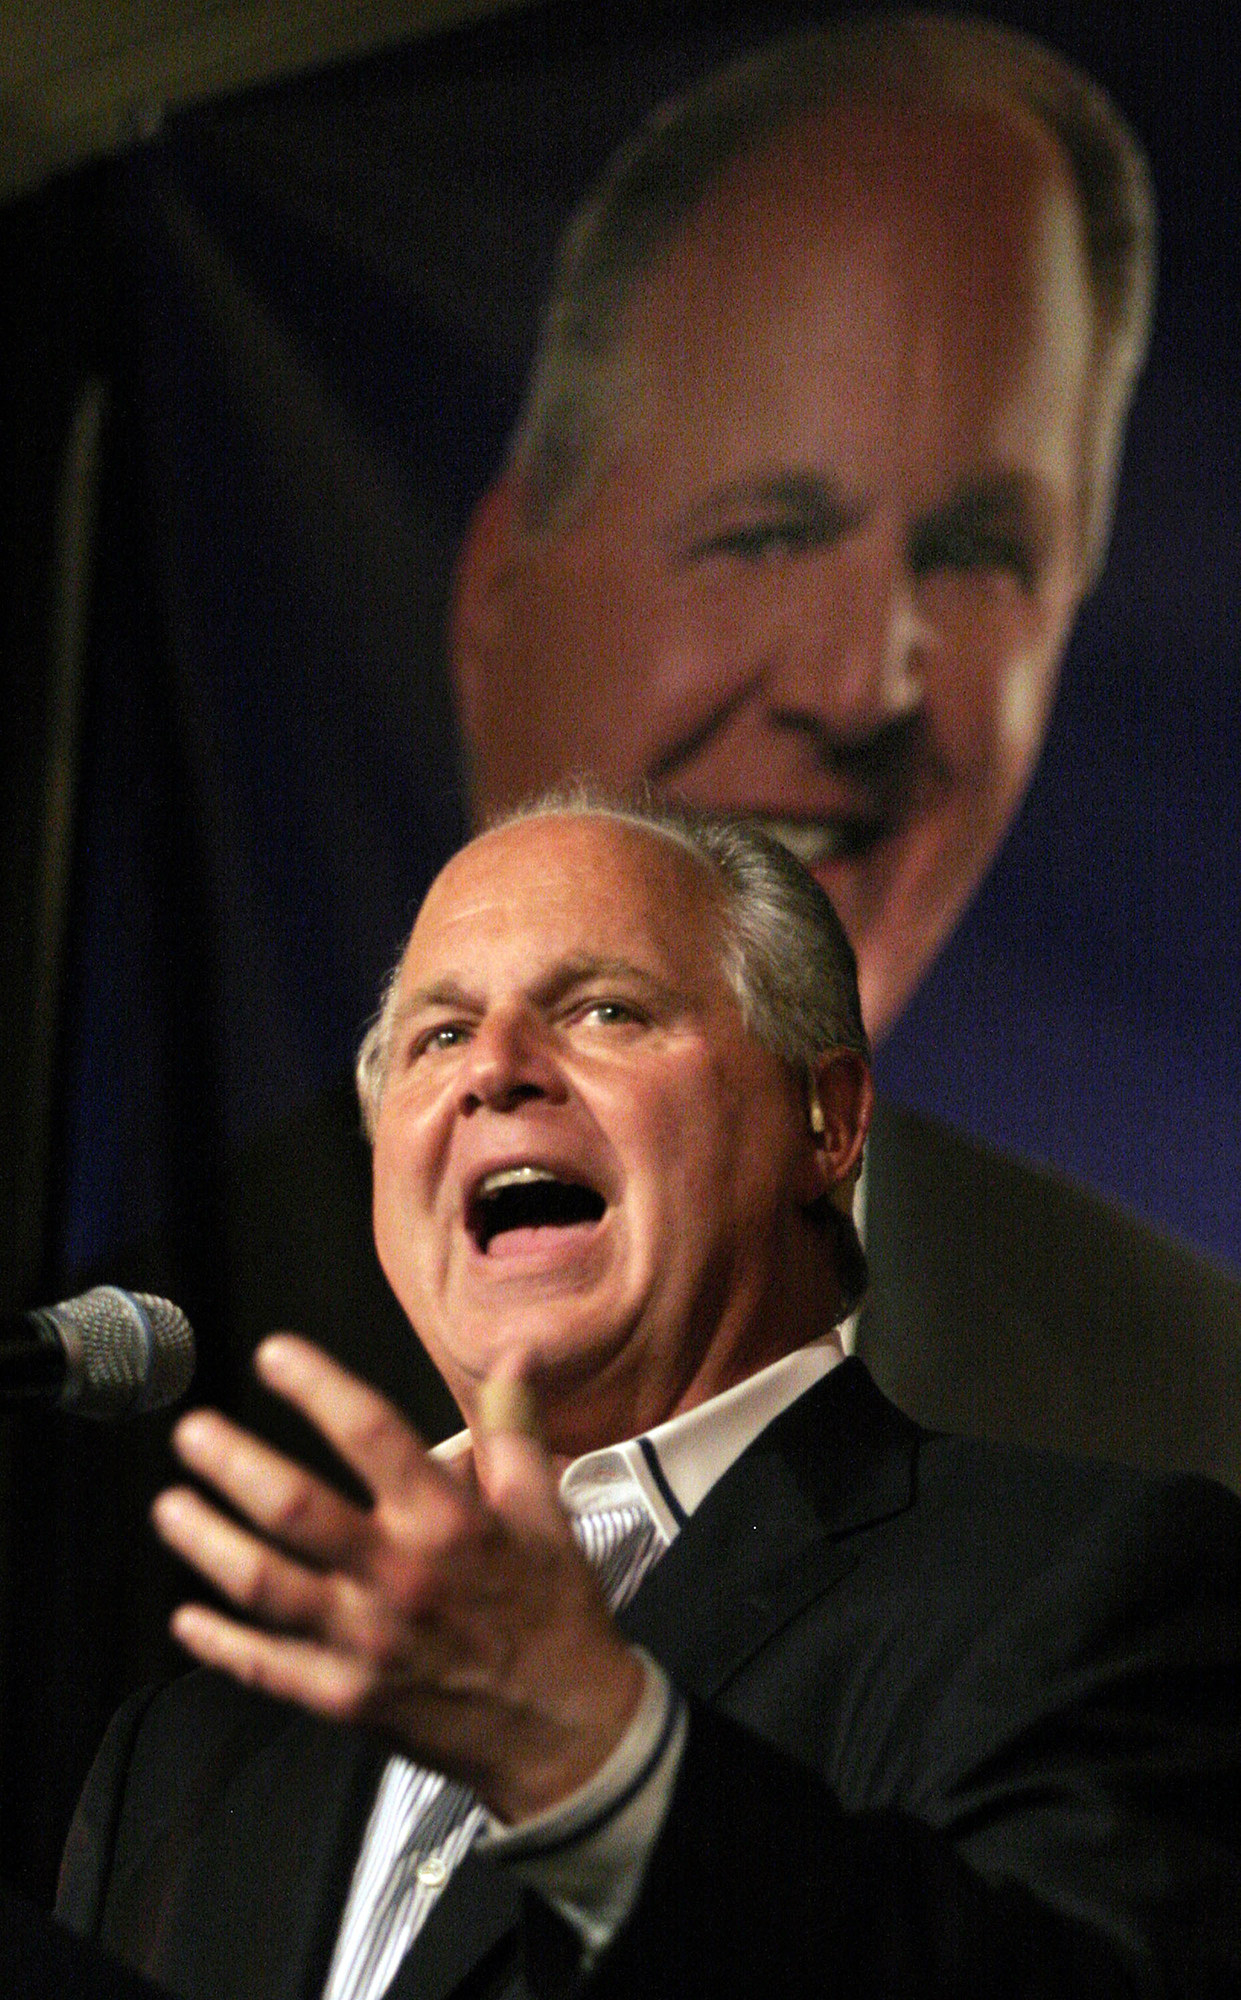 Rush Limbaugh in front of a photo of himself gesturing and with his mouth open in front of a microphone 